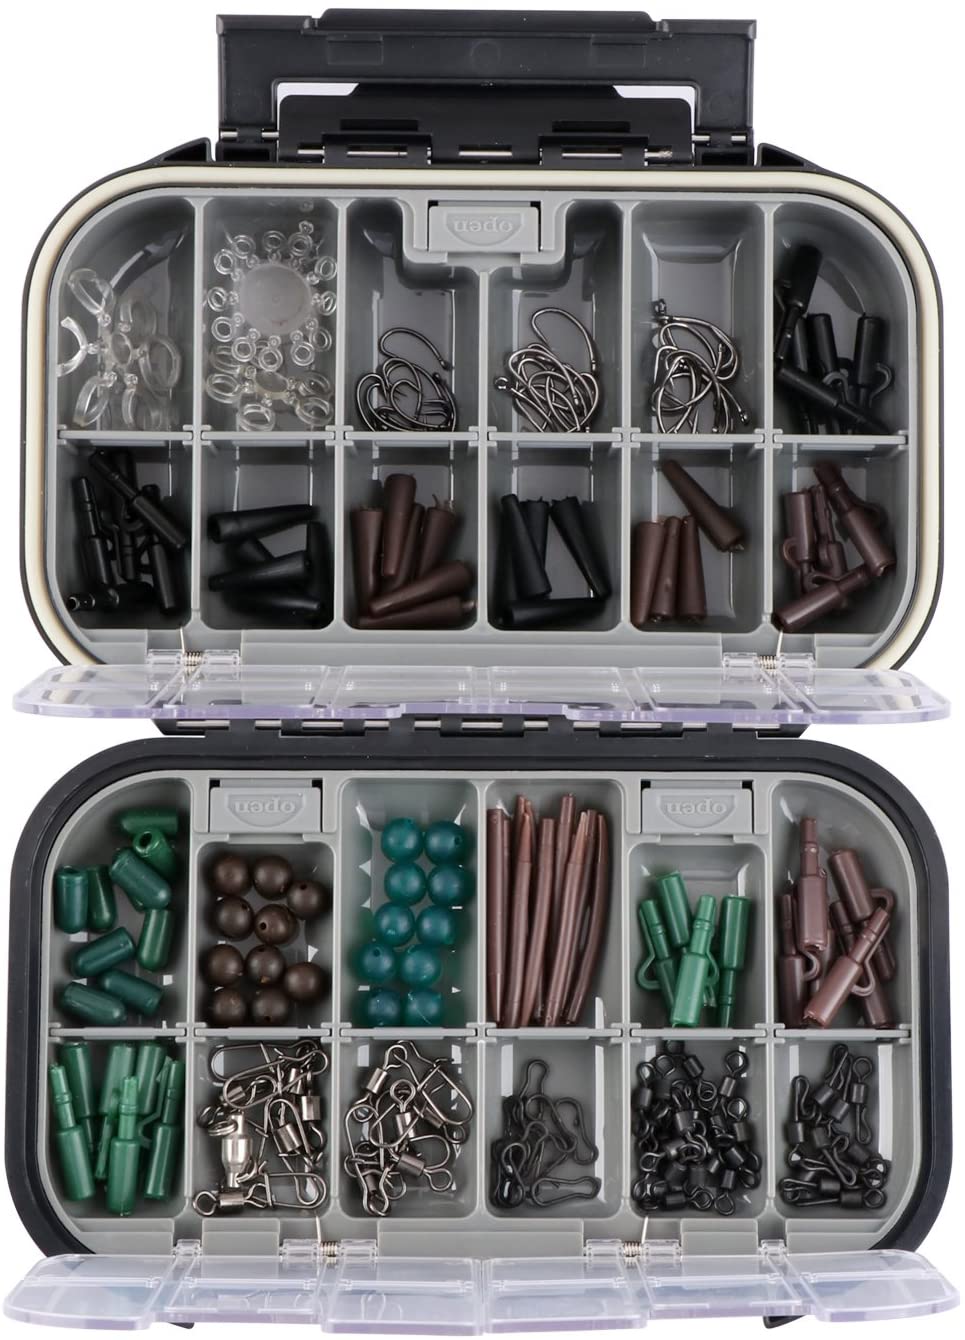 Goture Small Tackle Box, Black Waterproof 2 Sided Adjustable Fishing Lure  Tackle Boxes - Small